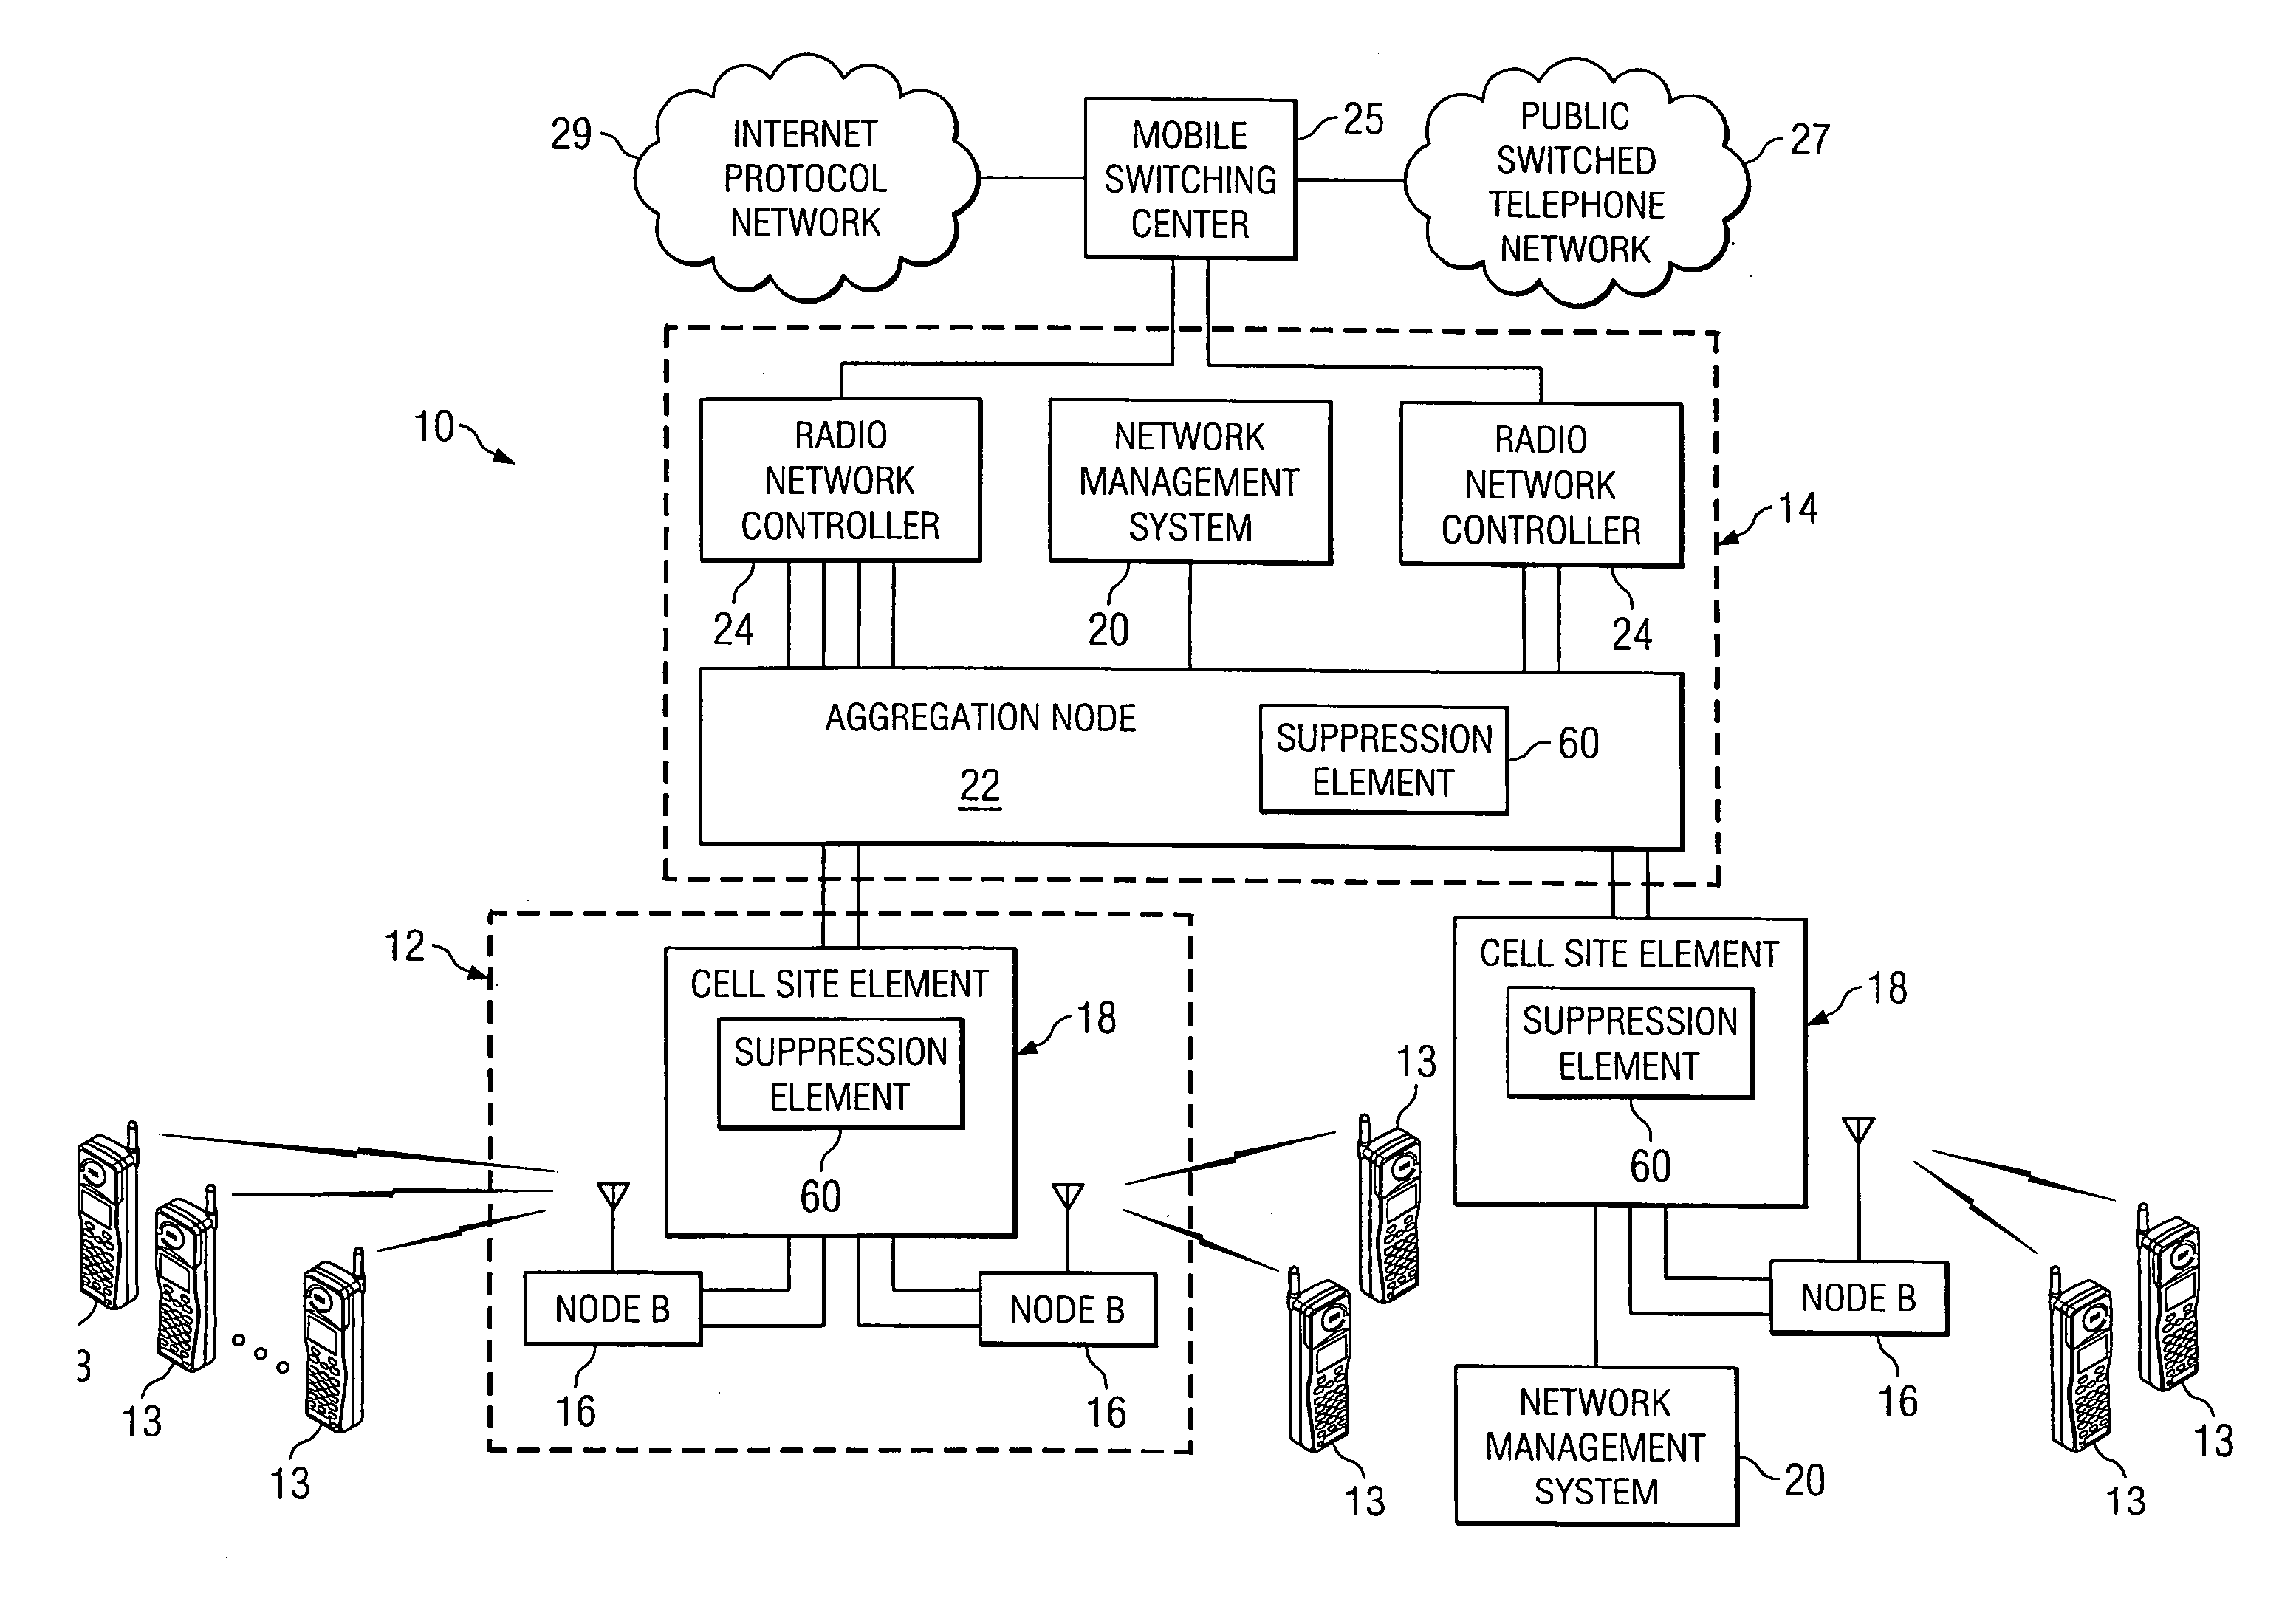 System and method for implementing suppression for asynchronous transfer mode (ATM) adaptation layer 5 (AAL5) traffic in a communications environment